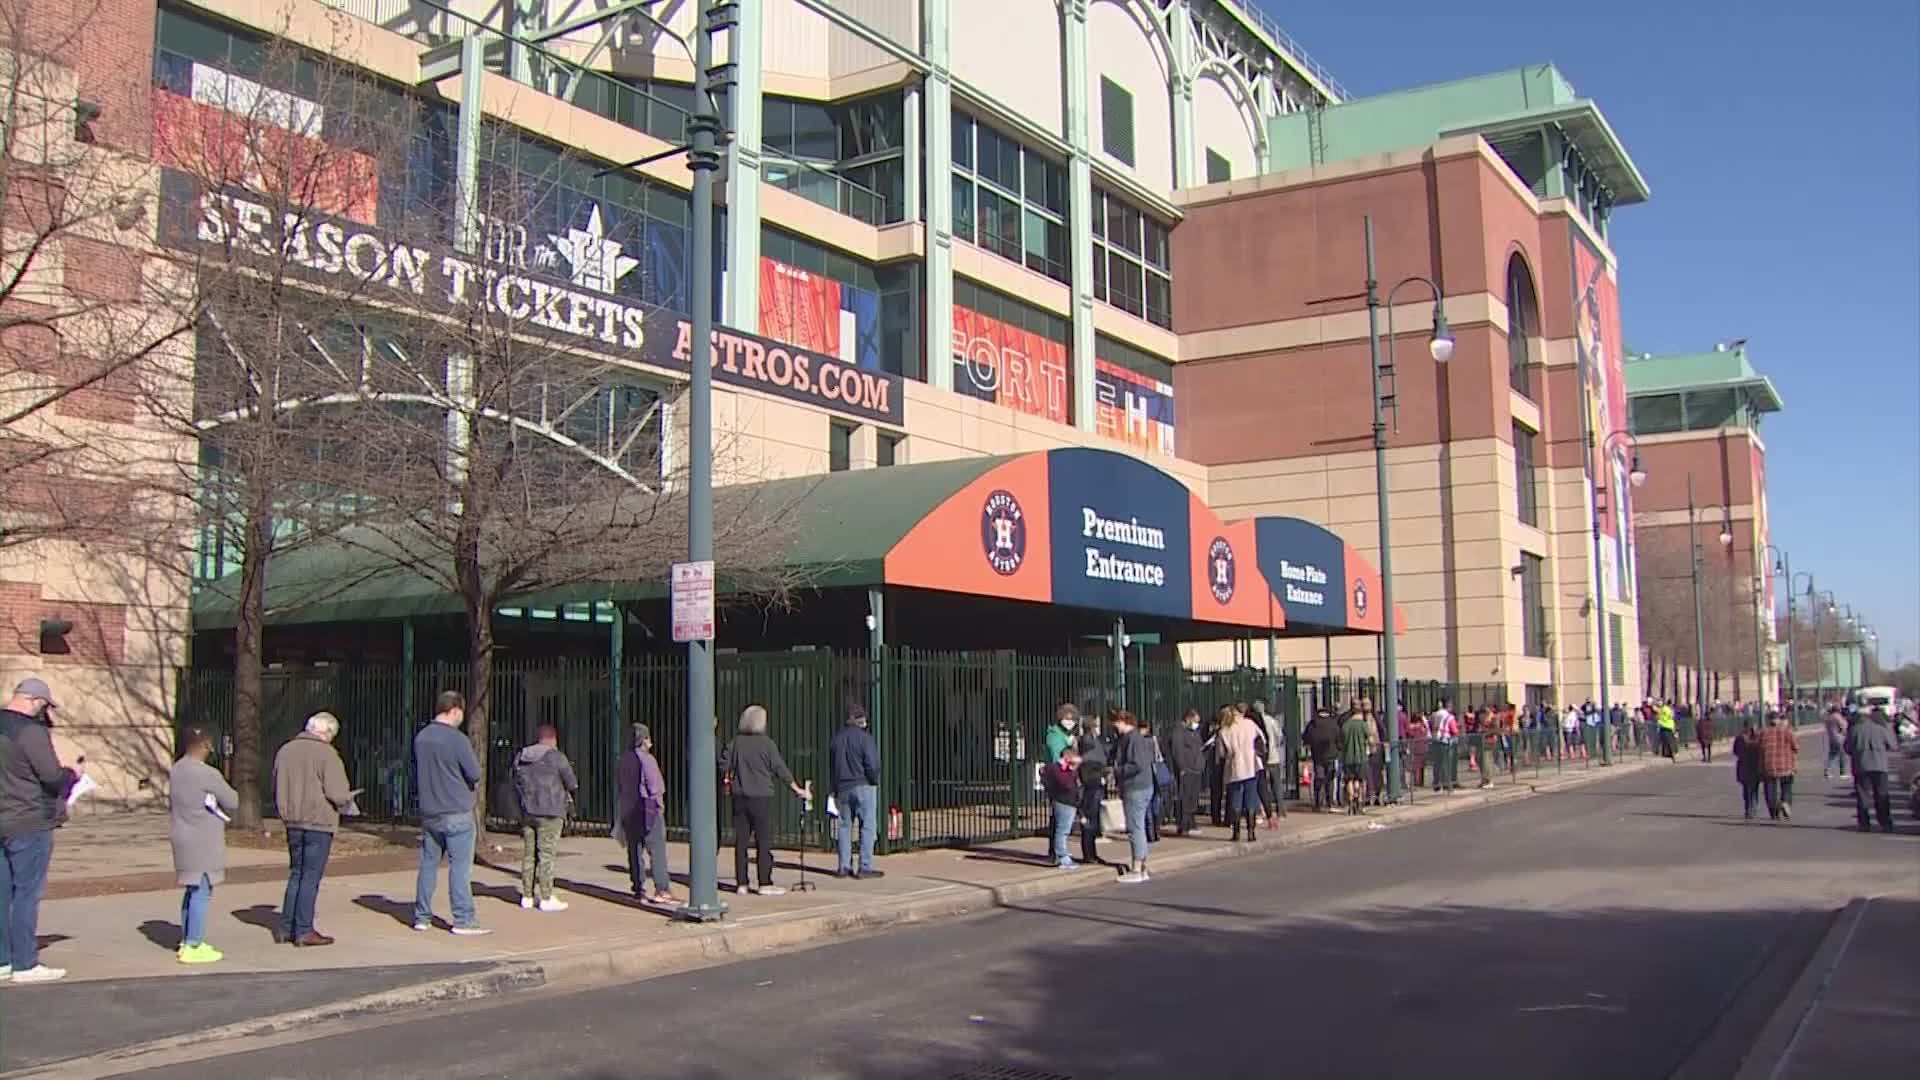 Downtown Houston, Minute Maid Park Entrance - Home of the Astros